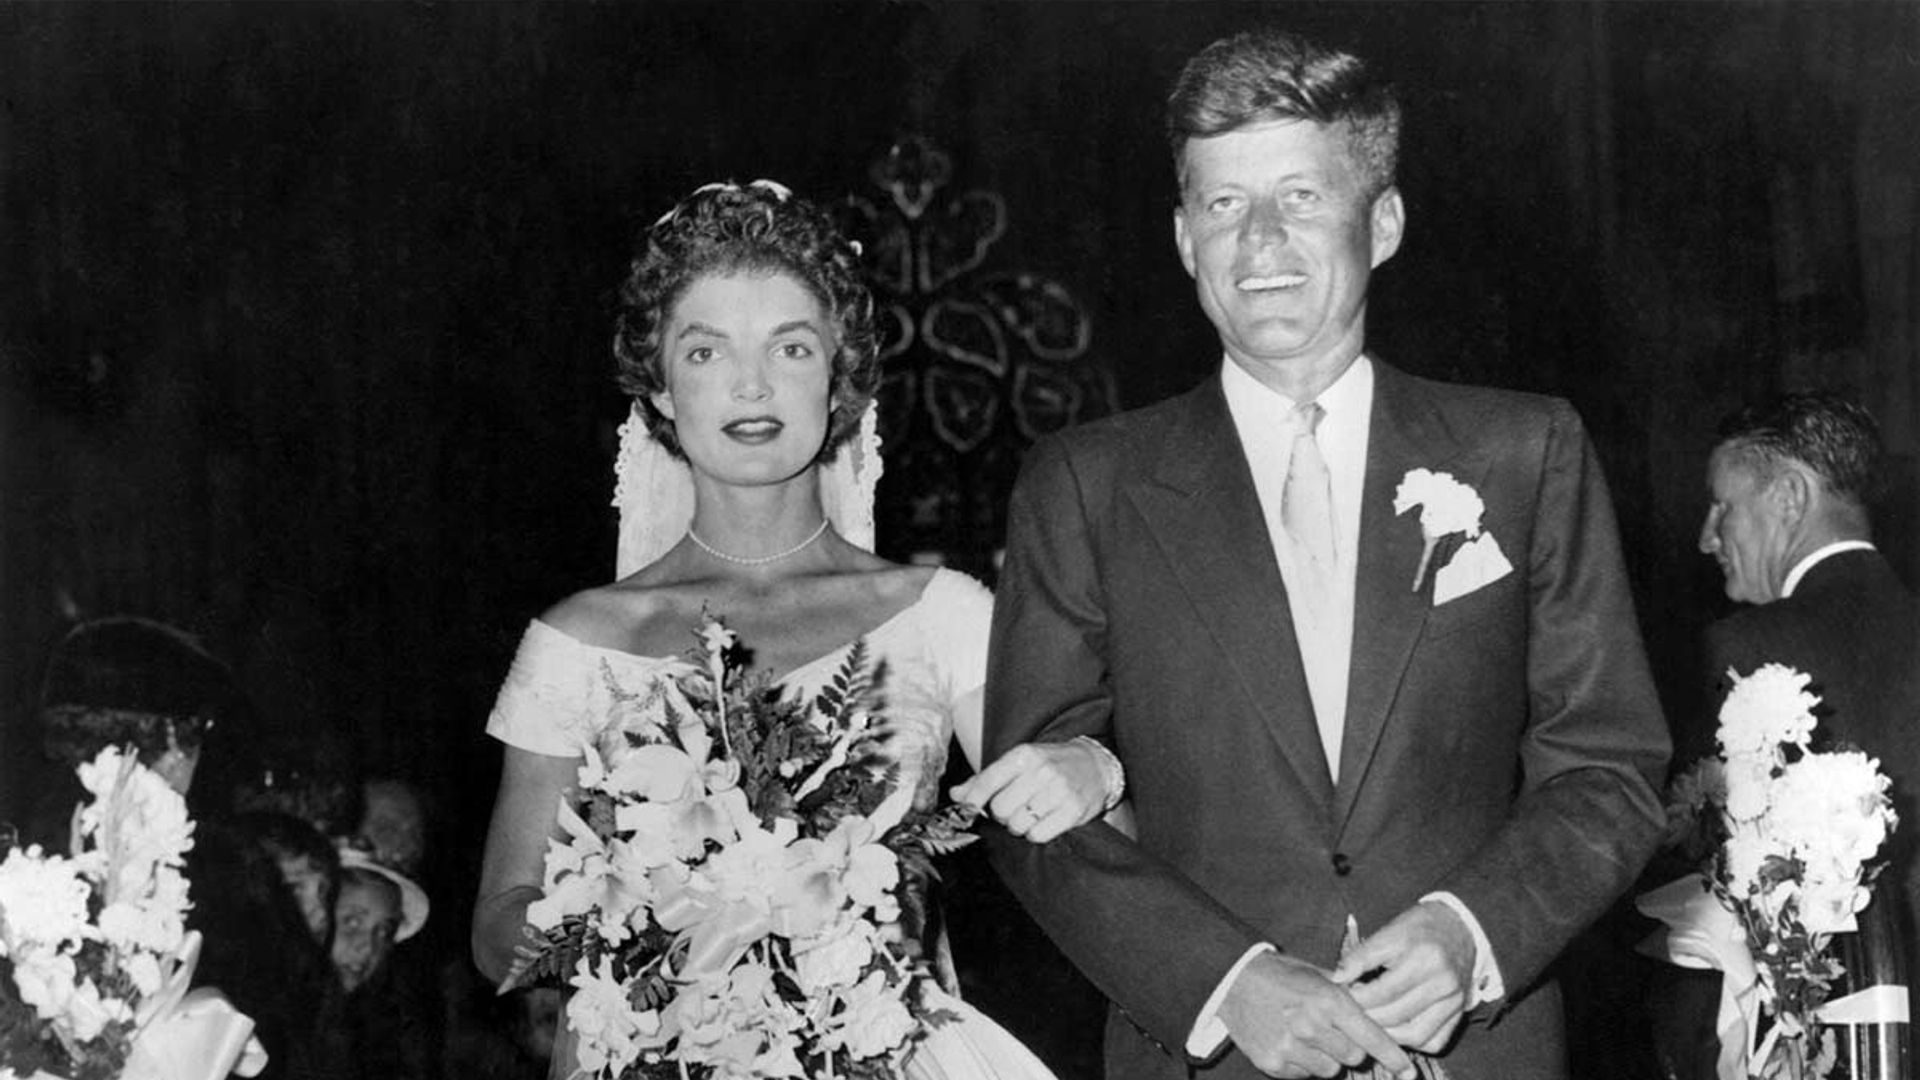 See new details of Jackie Kennedy's wedding dress in previously unpublished photo